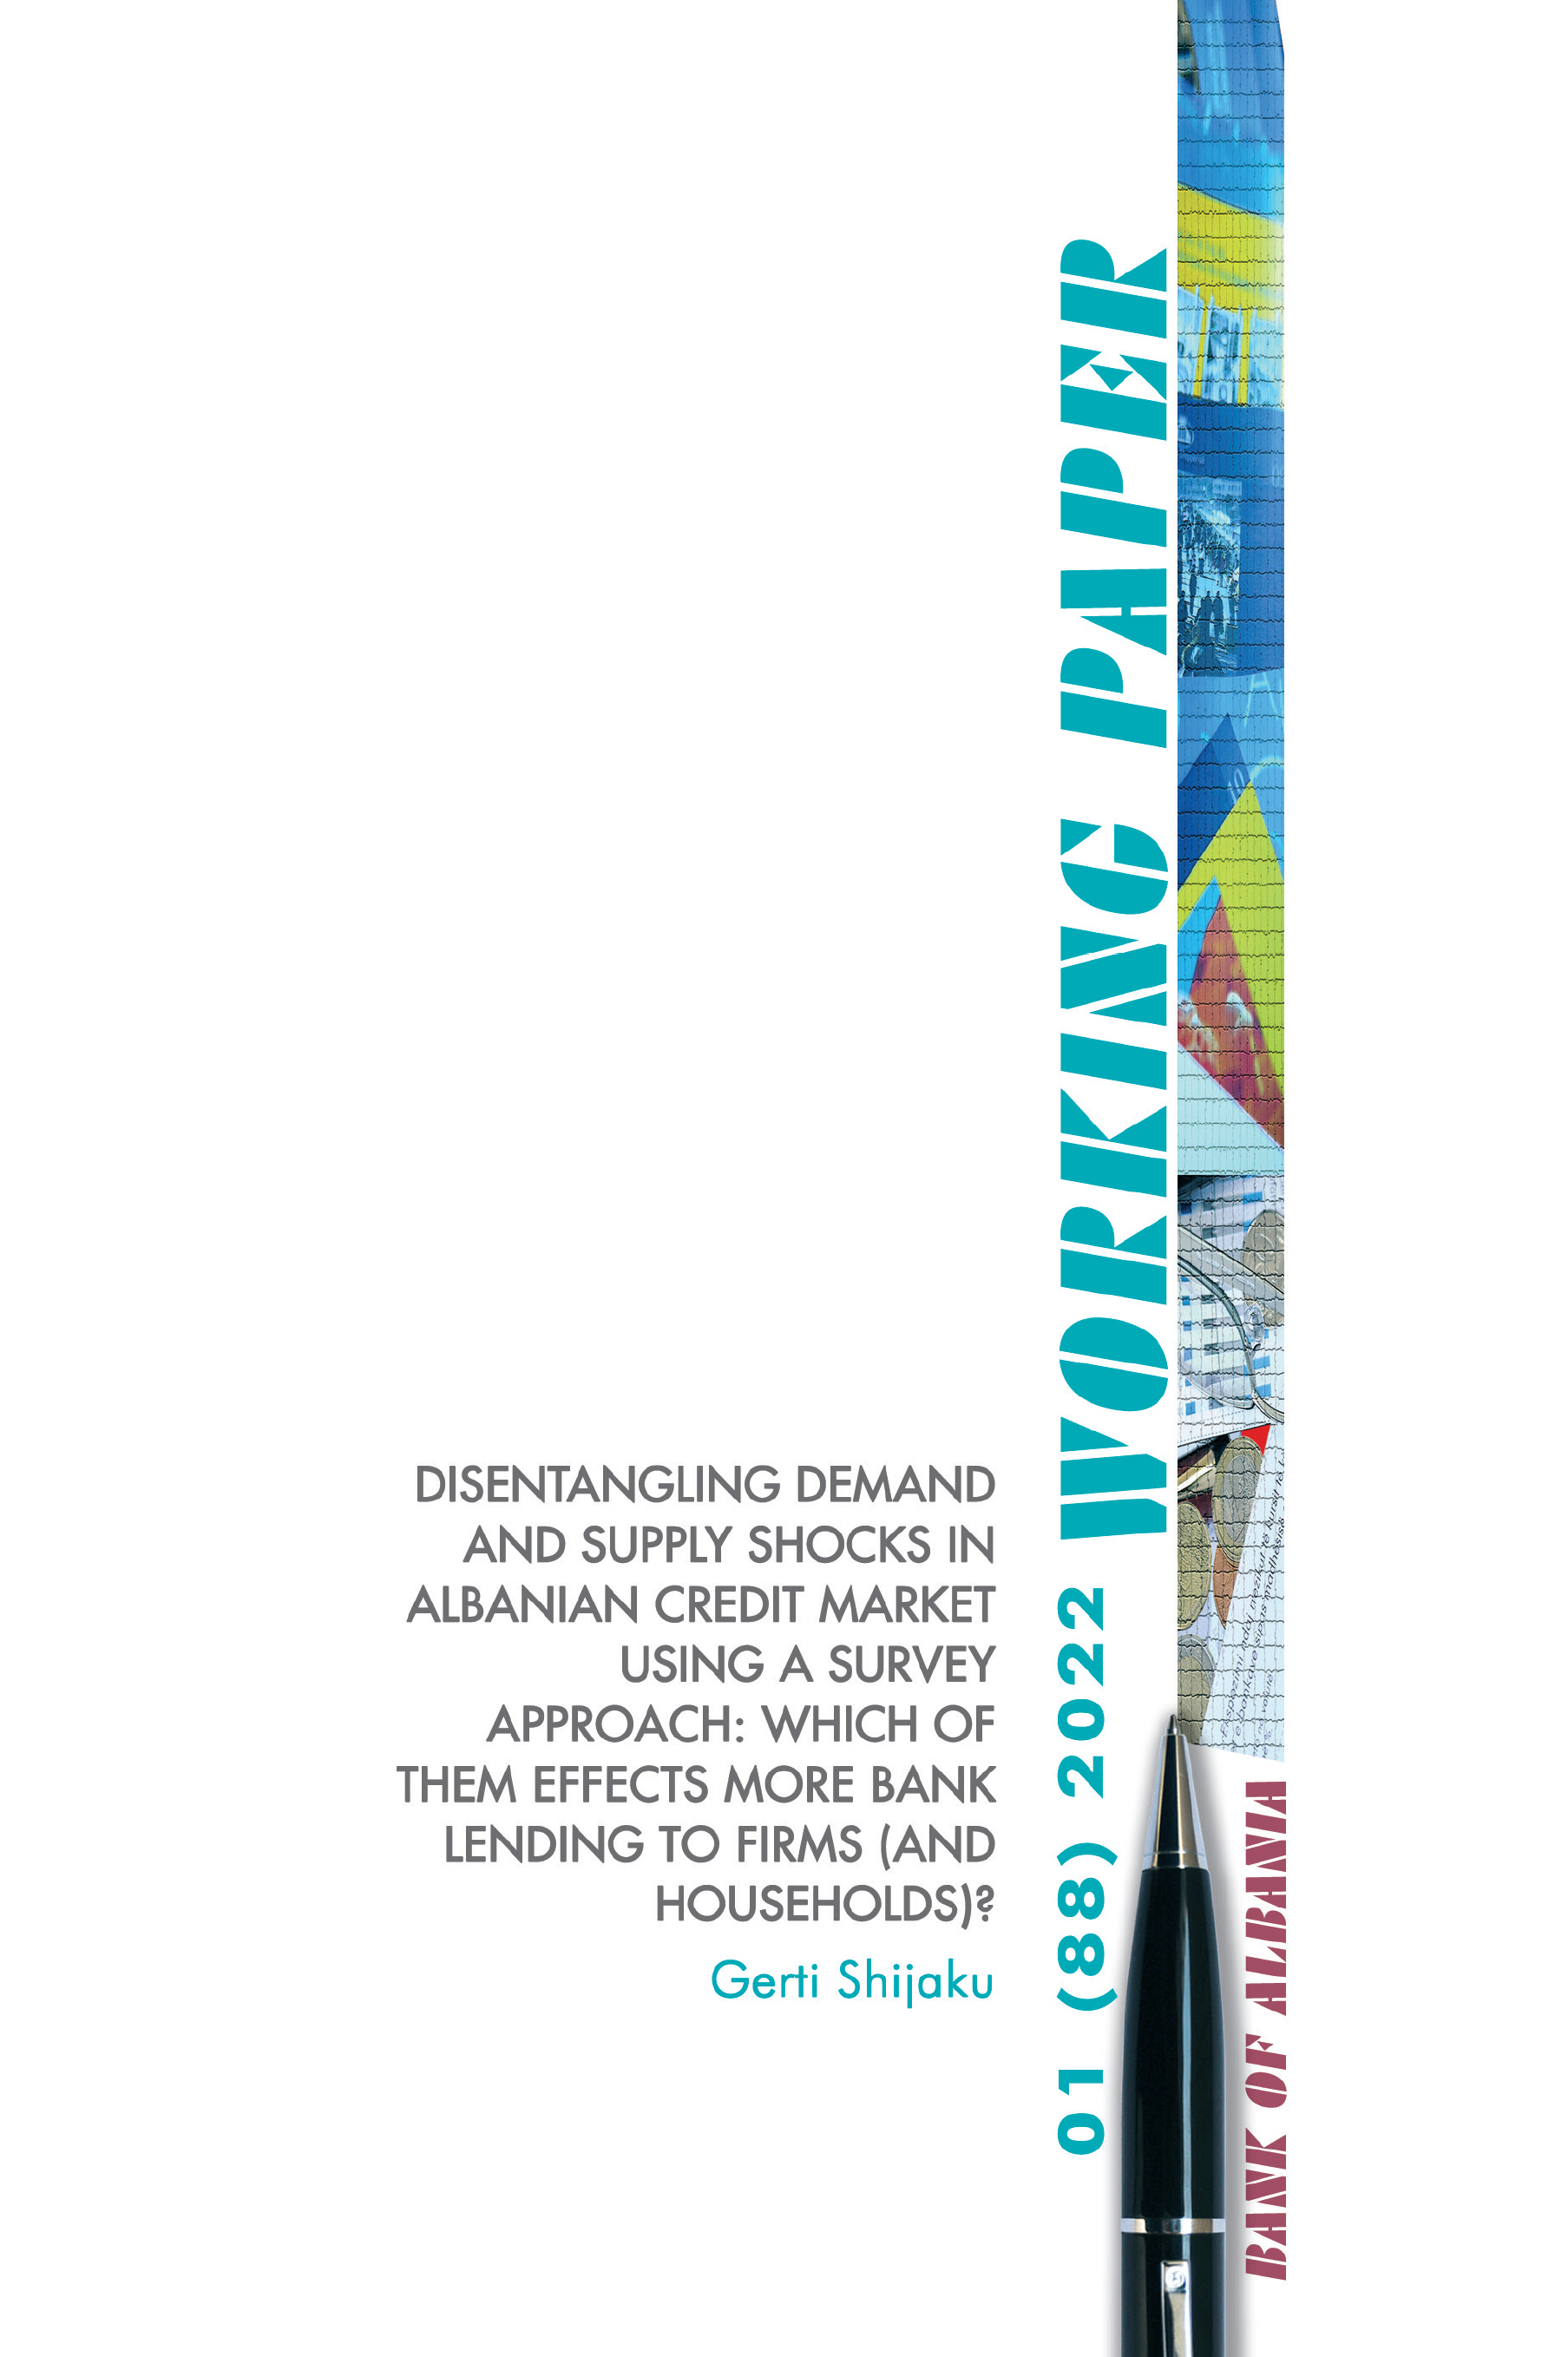 Disentangling demand and supply shocks in Albanian credit market using a survey approach: which of them affects more bank lending to firms (and households)?